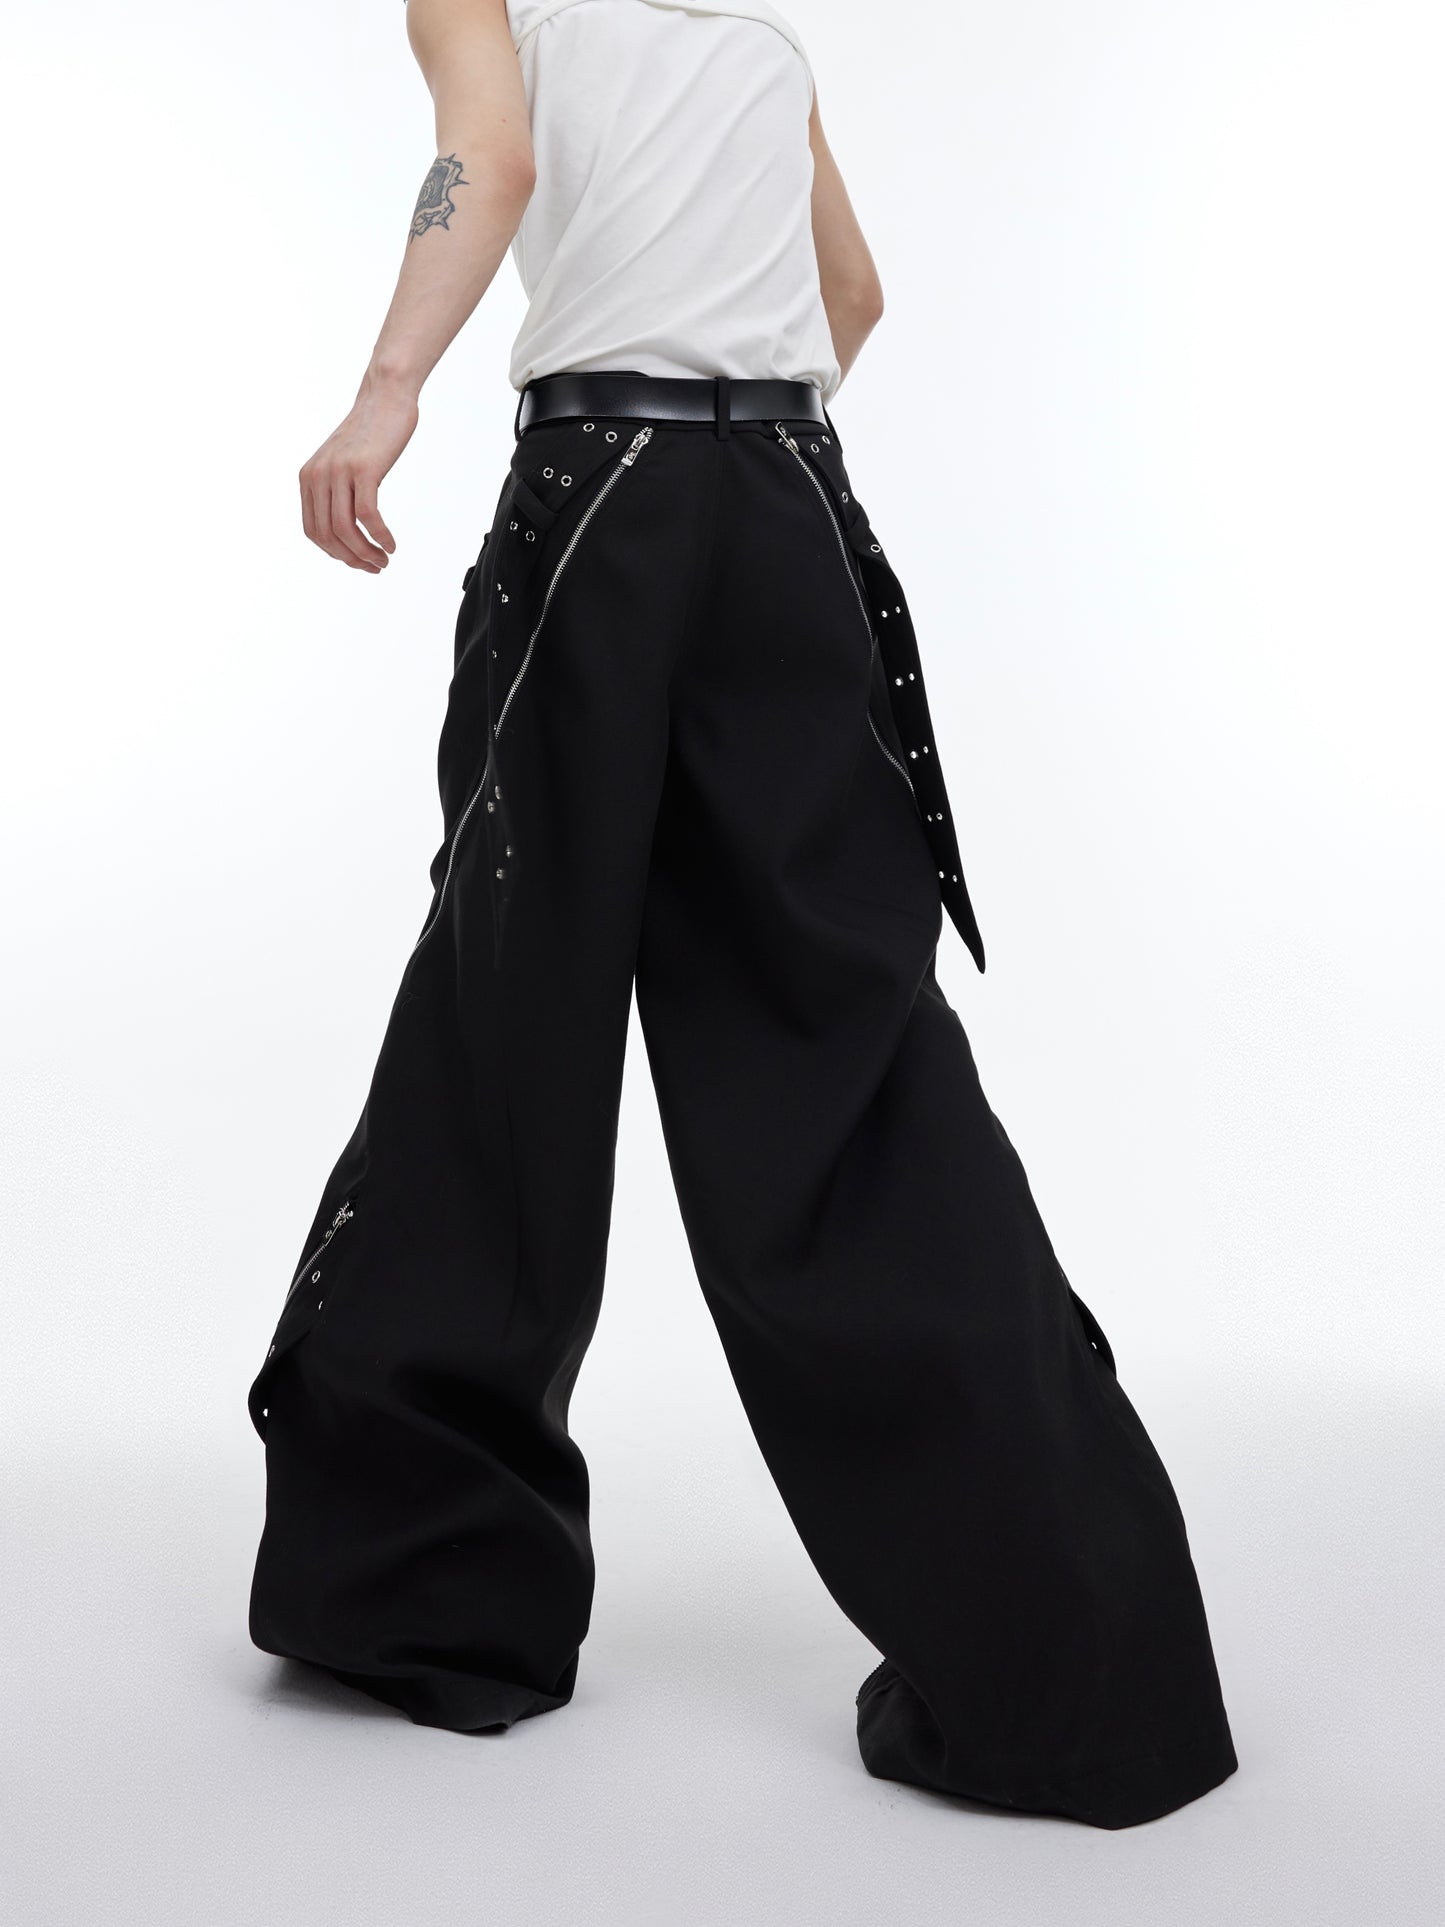 【24s January.】Deconstructed Metal Zipper Ripped Pants